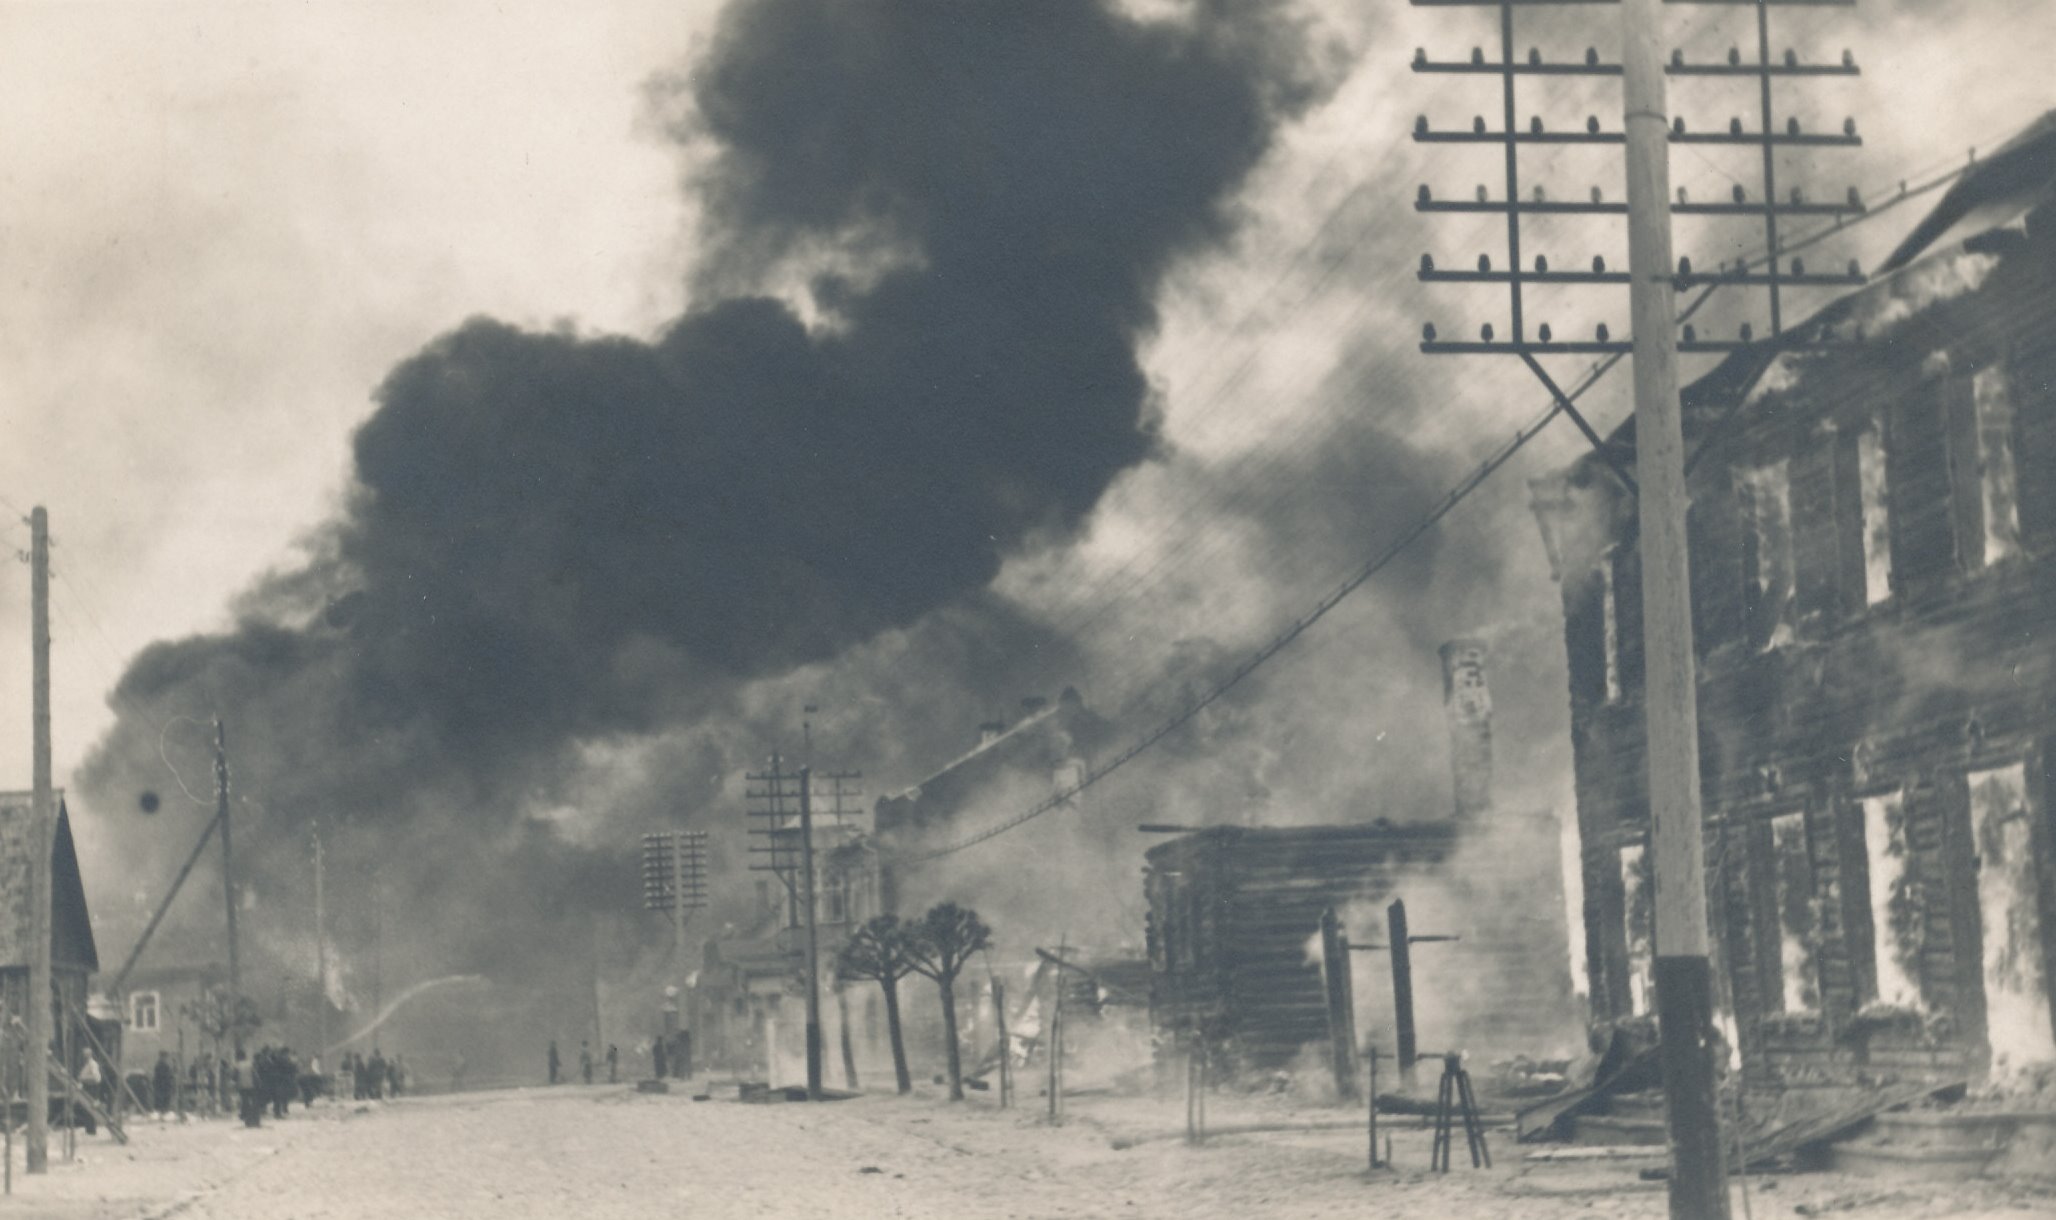 Photo. The city of Petser fire in 1939. In May, 2/3 of the city was destroyed.